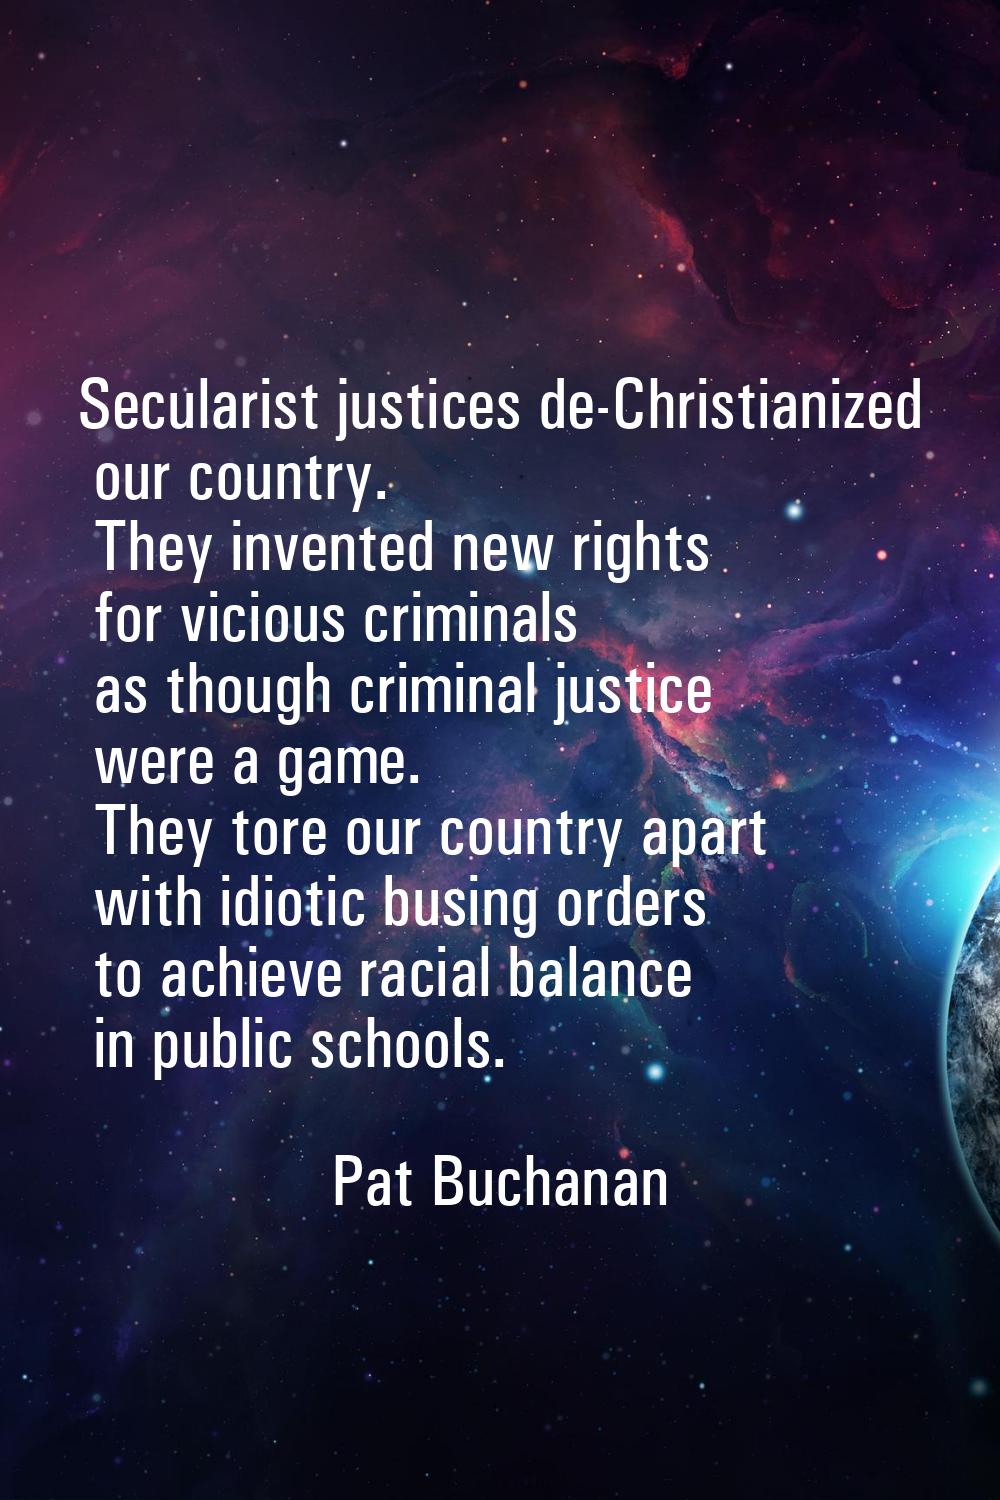 Secularist justices de-Christianized our country. They invented new rights for vicious criminals as